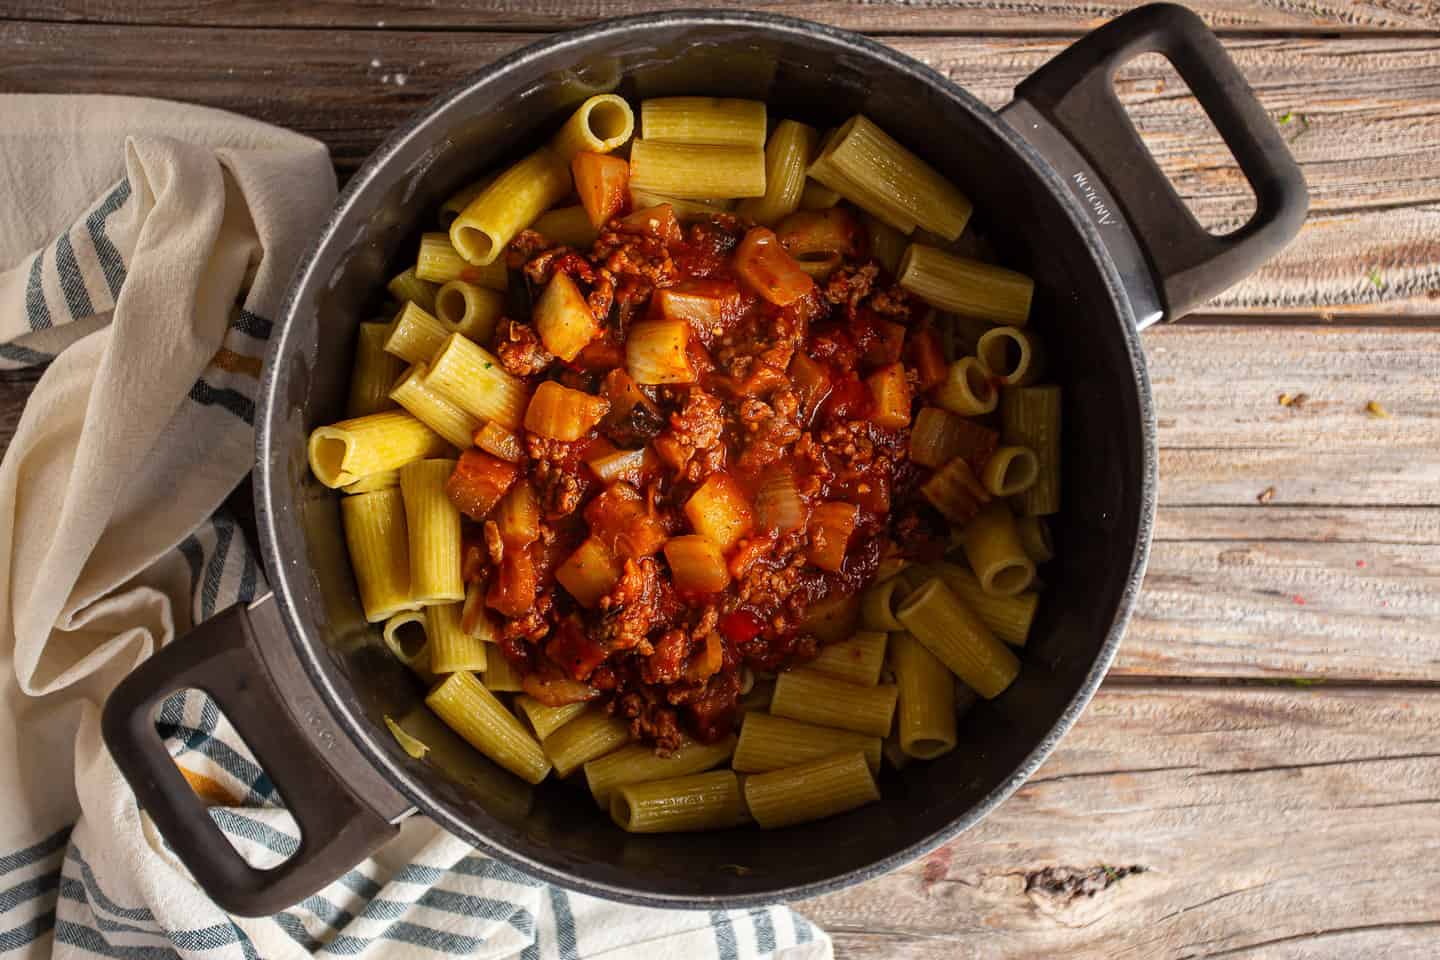 Tossing cooked rigatoni with sauce, sausage, and vegetables.